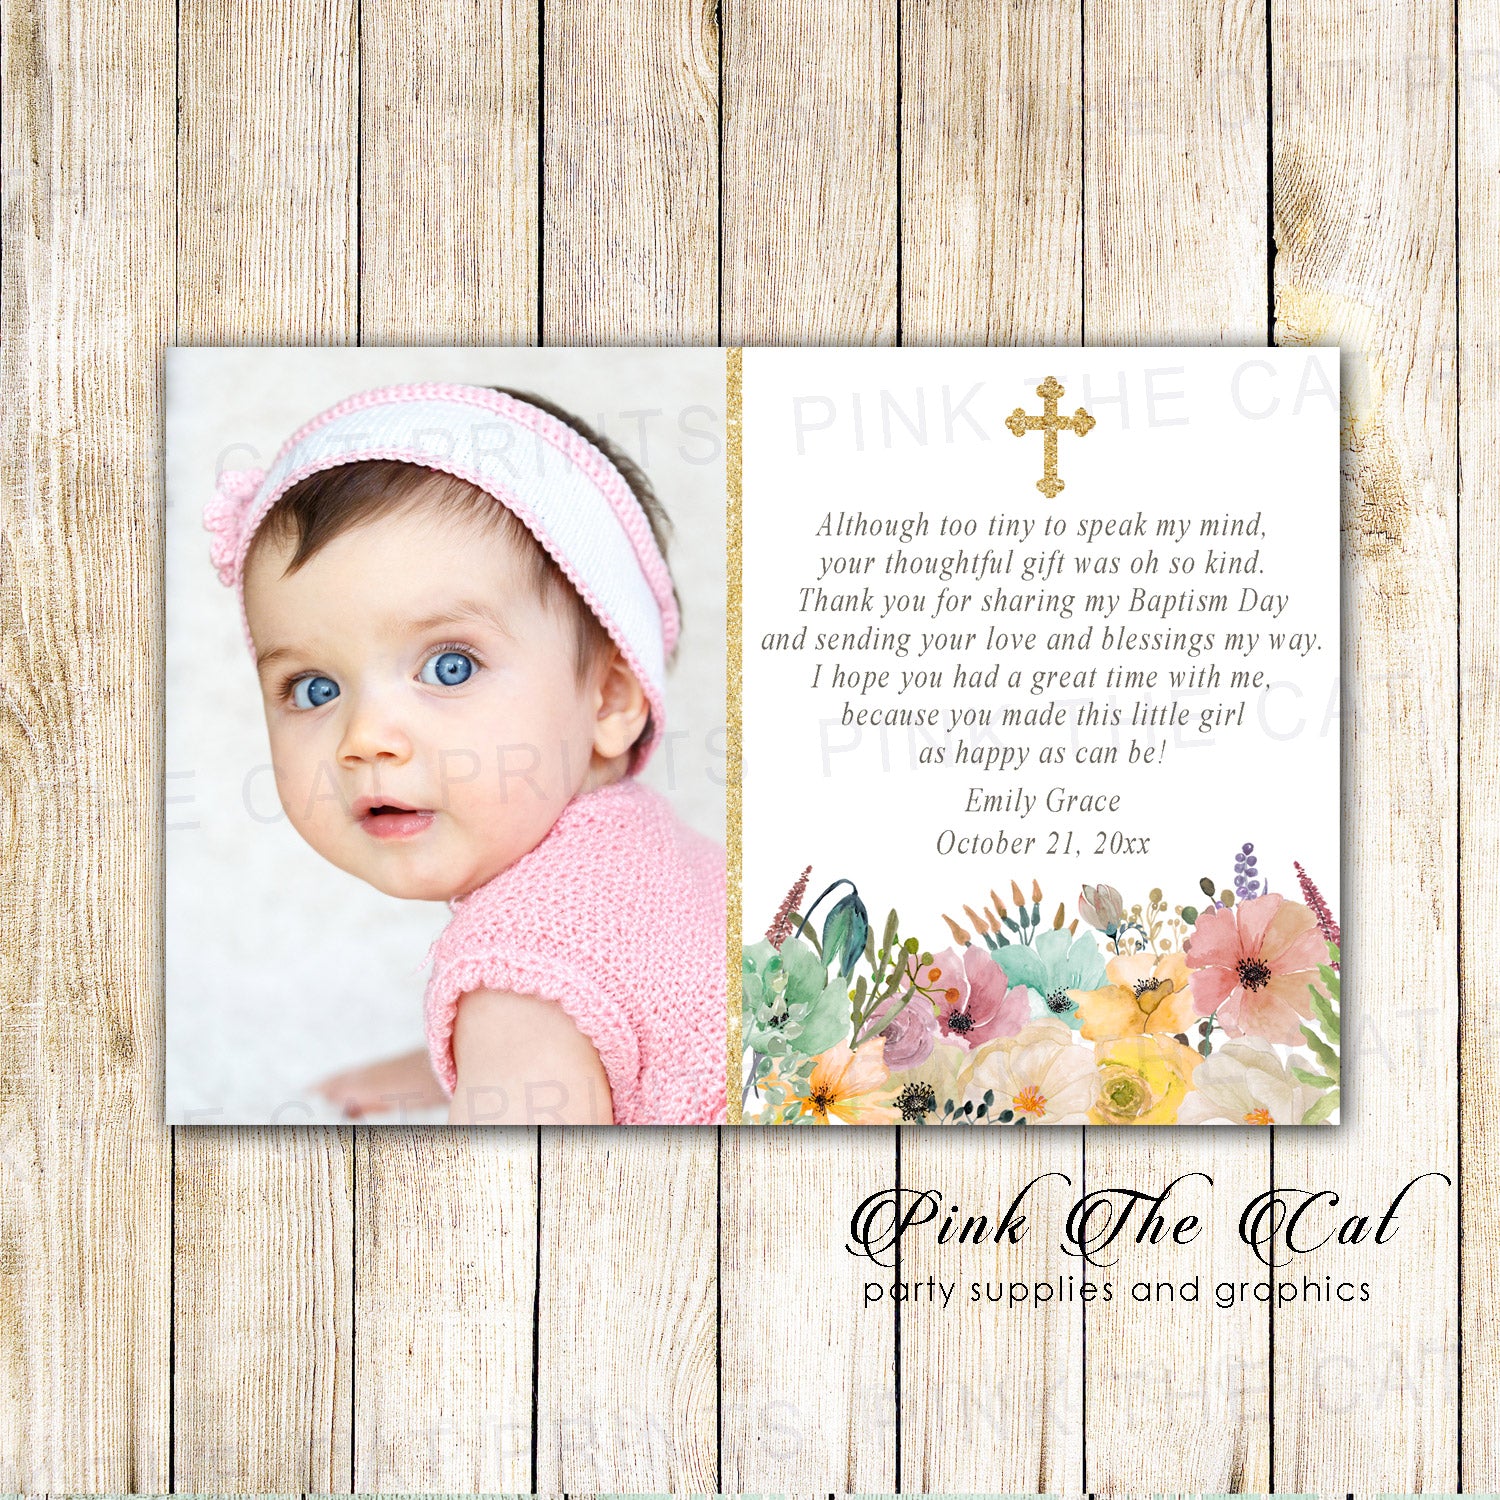 30 Thank You Cards Floral Girl Baptism Christening With Photo